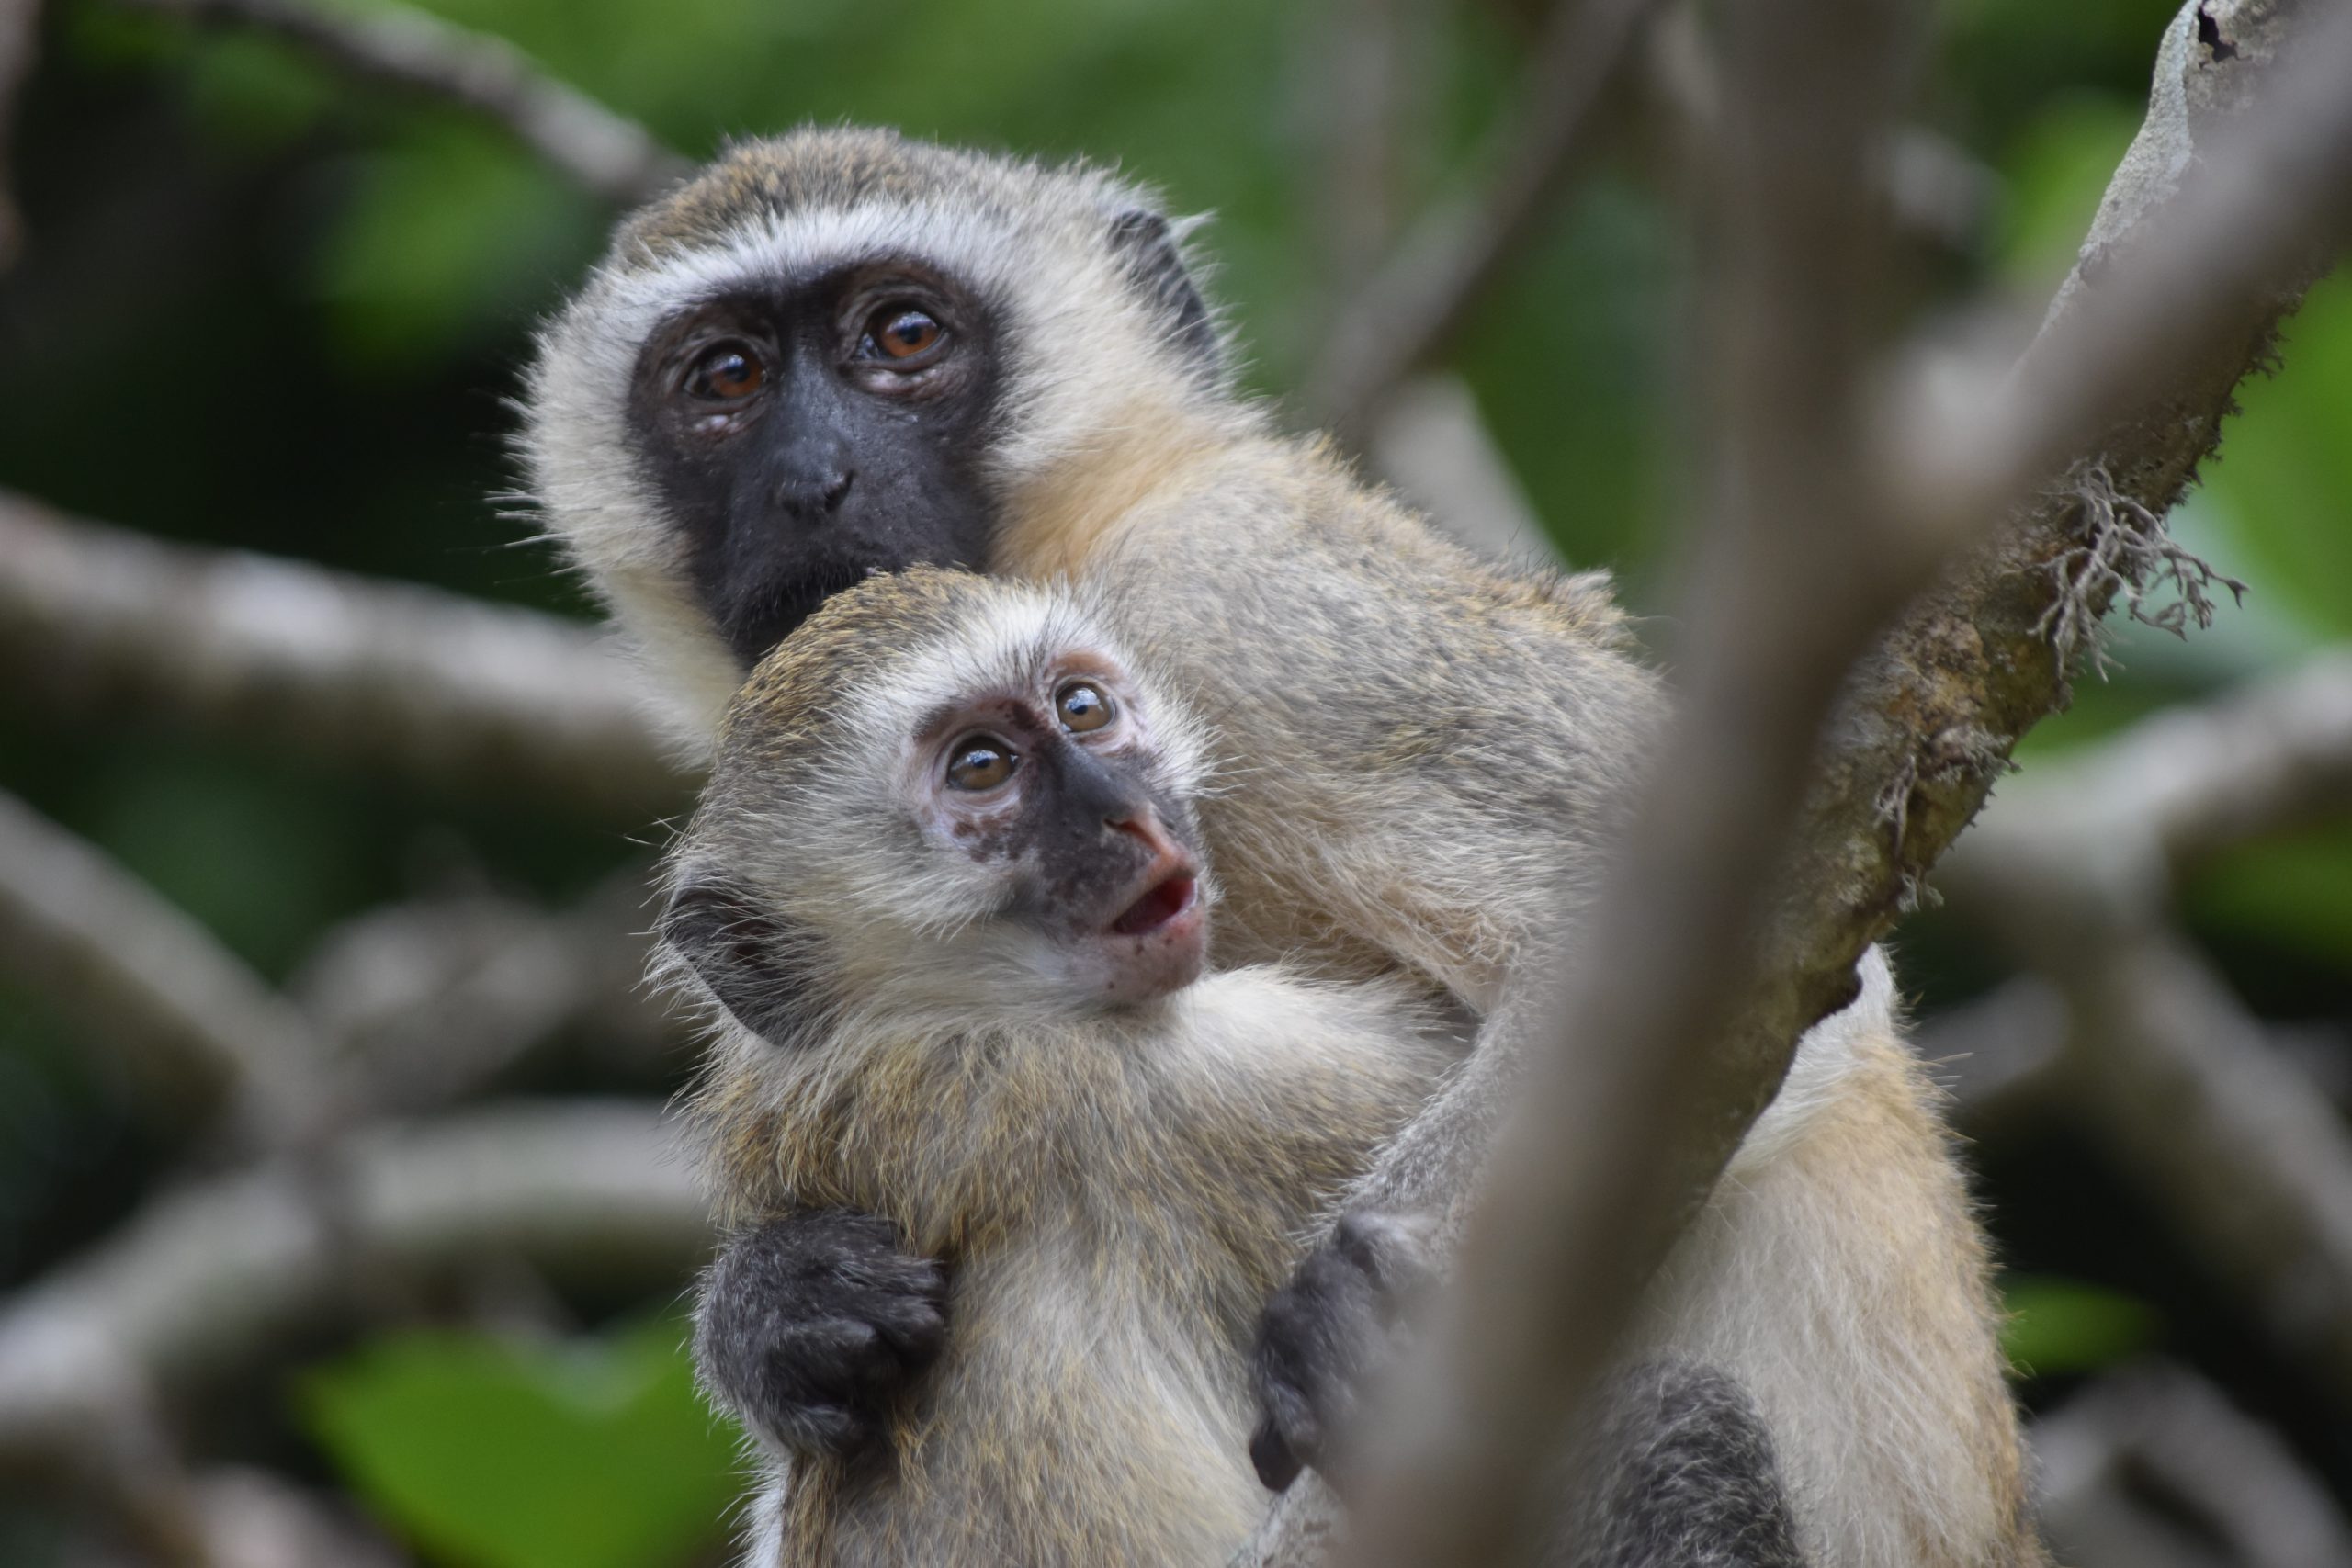 A photograph details the image of a mother monkey and her baby monkey holding each other on a tree branch.